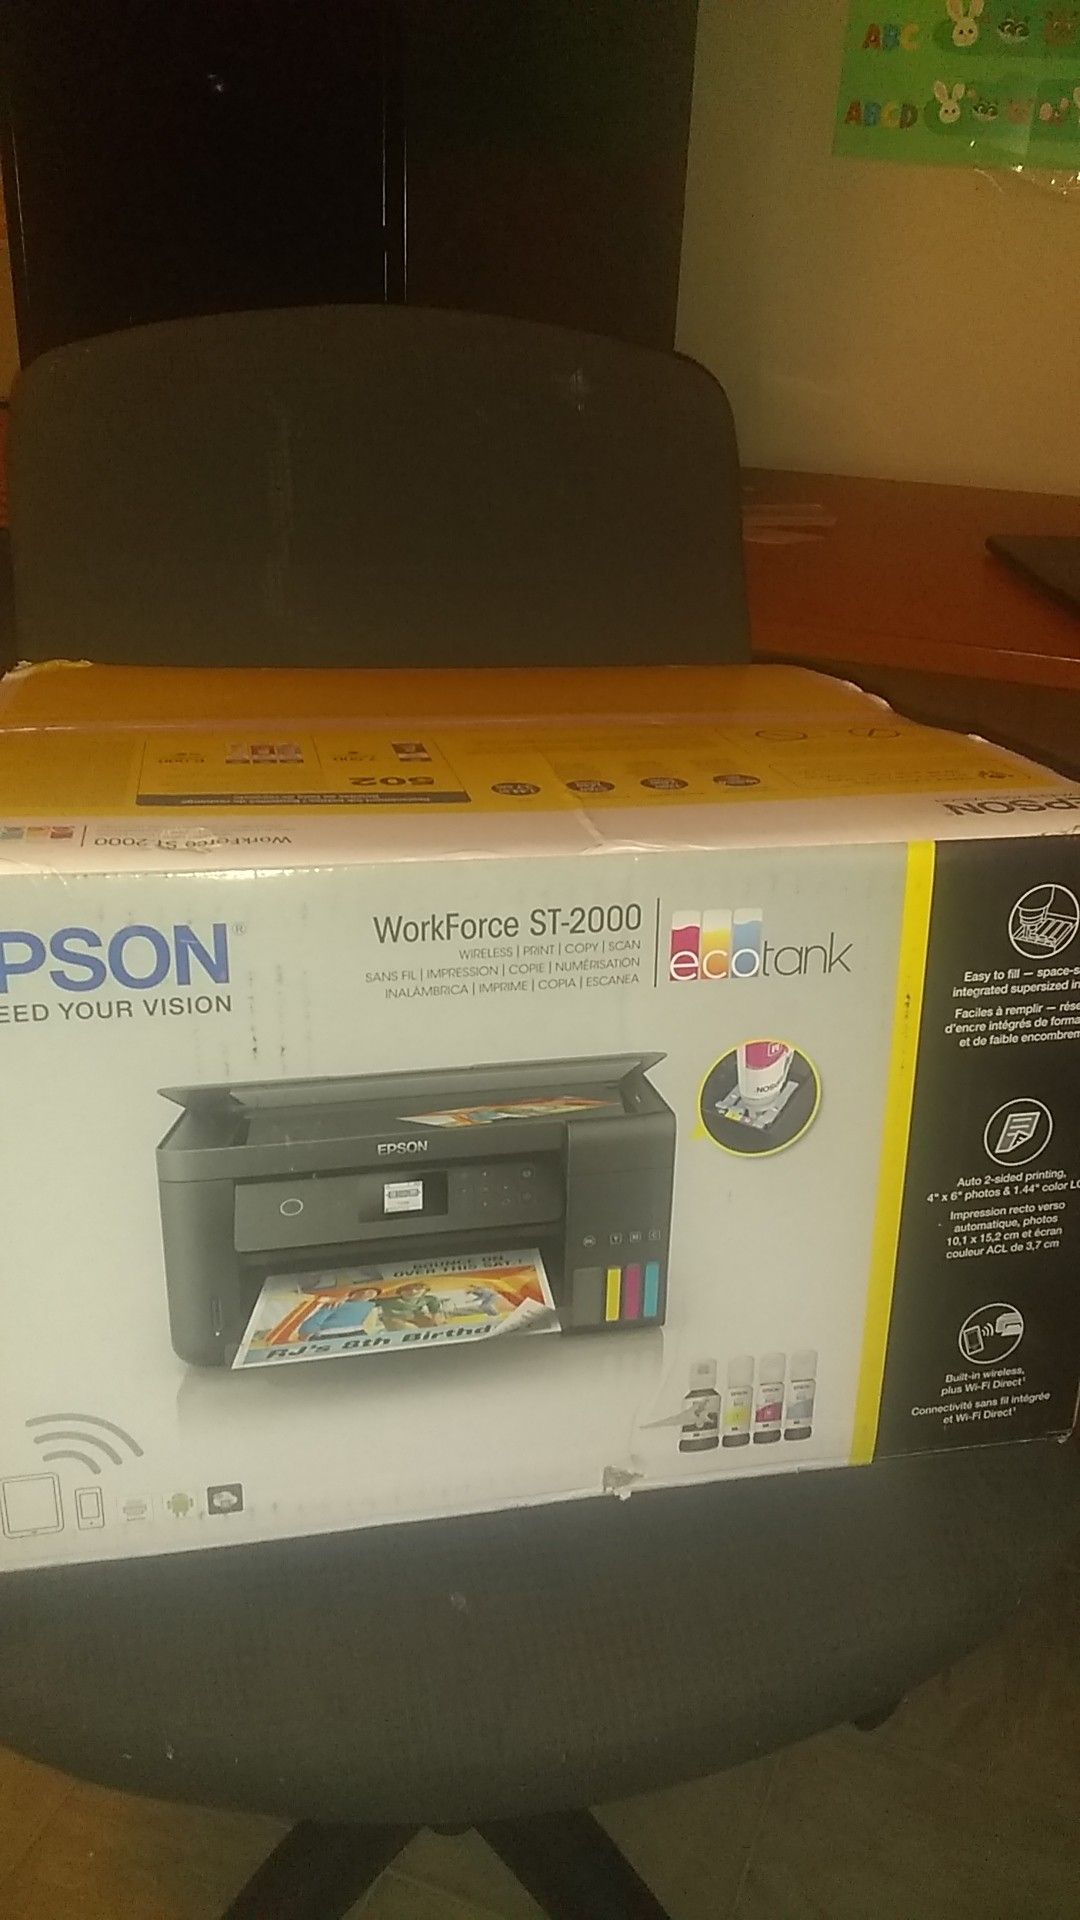 Brand-new never opened Epson printer copier and scanner